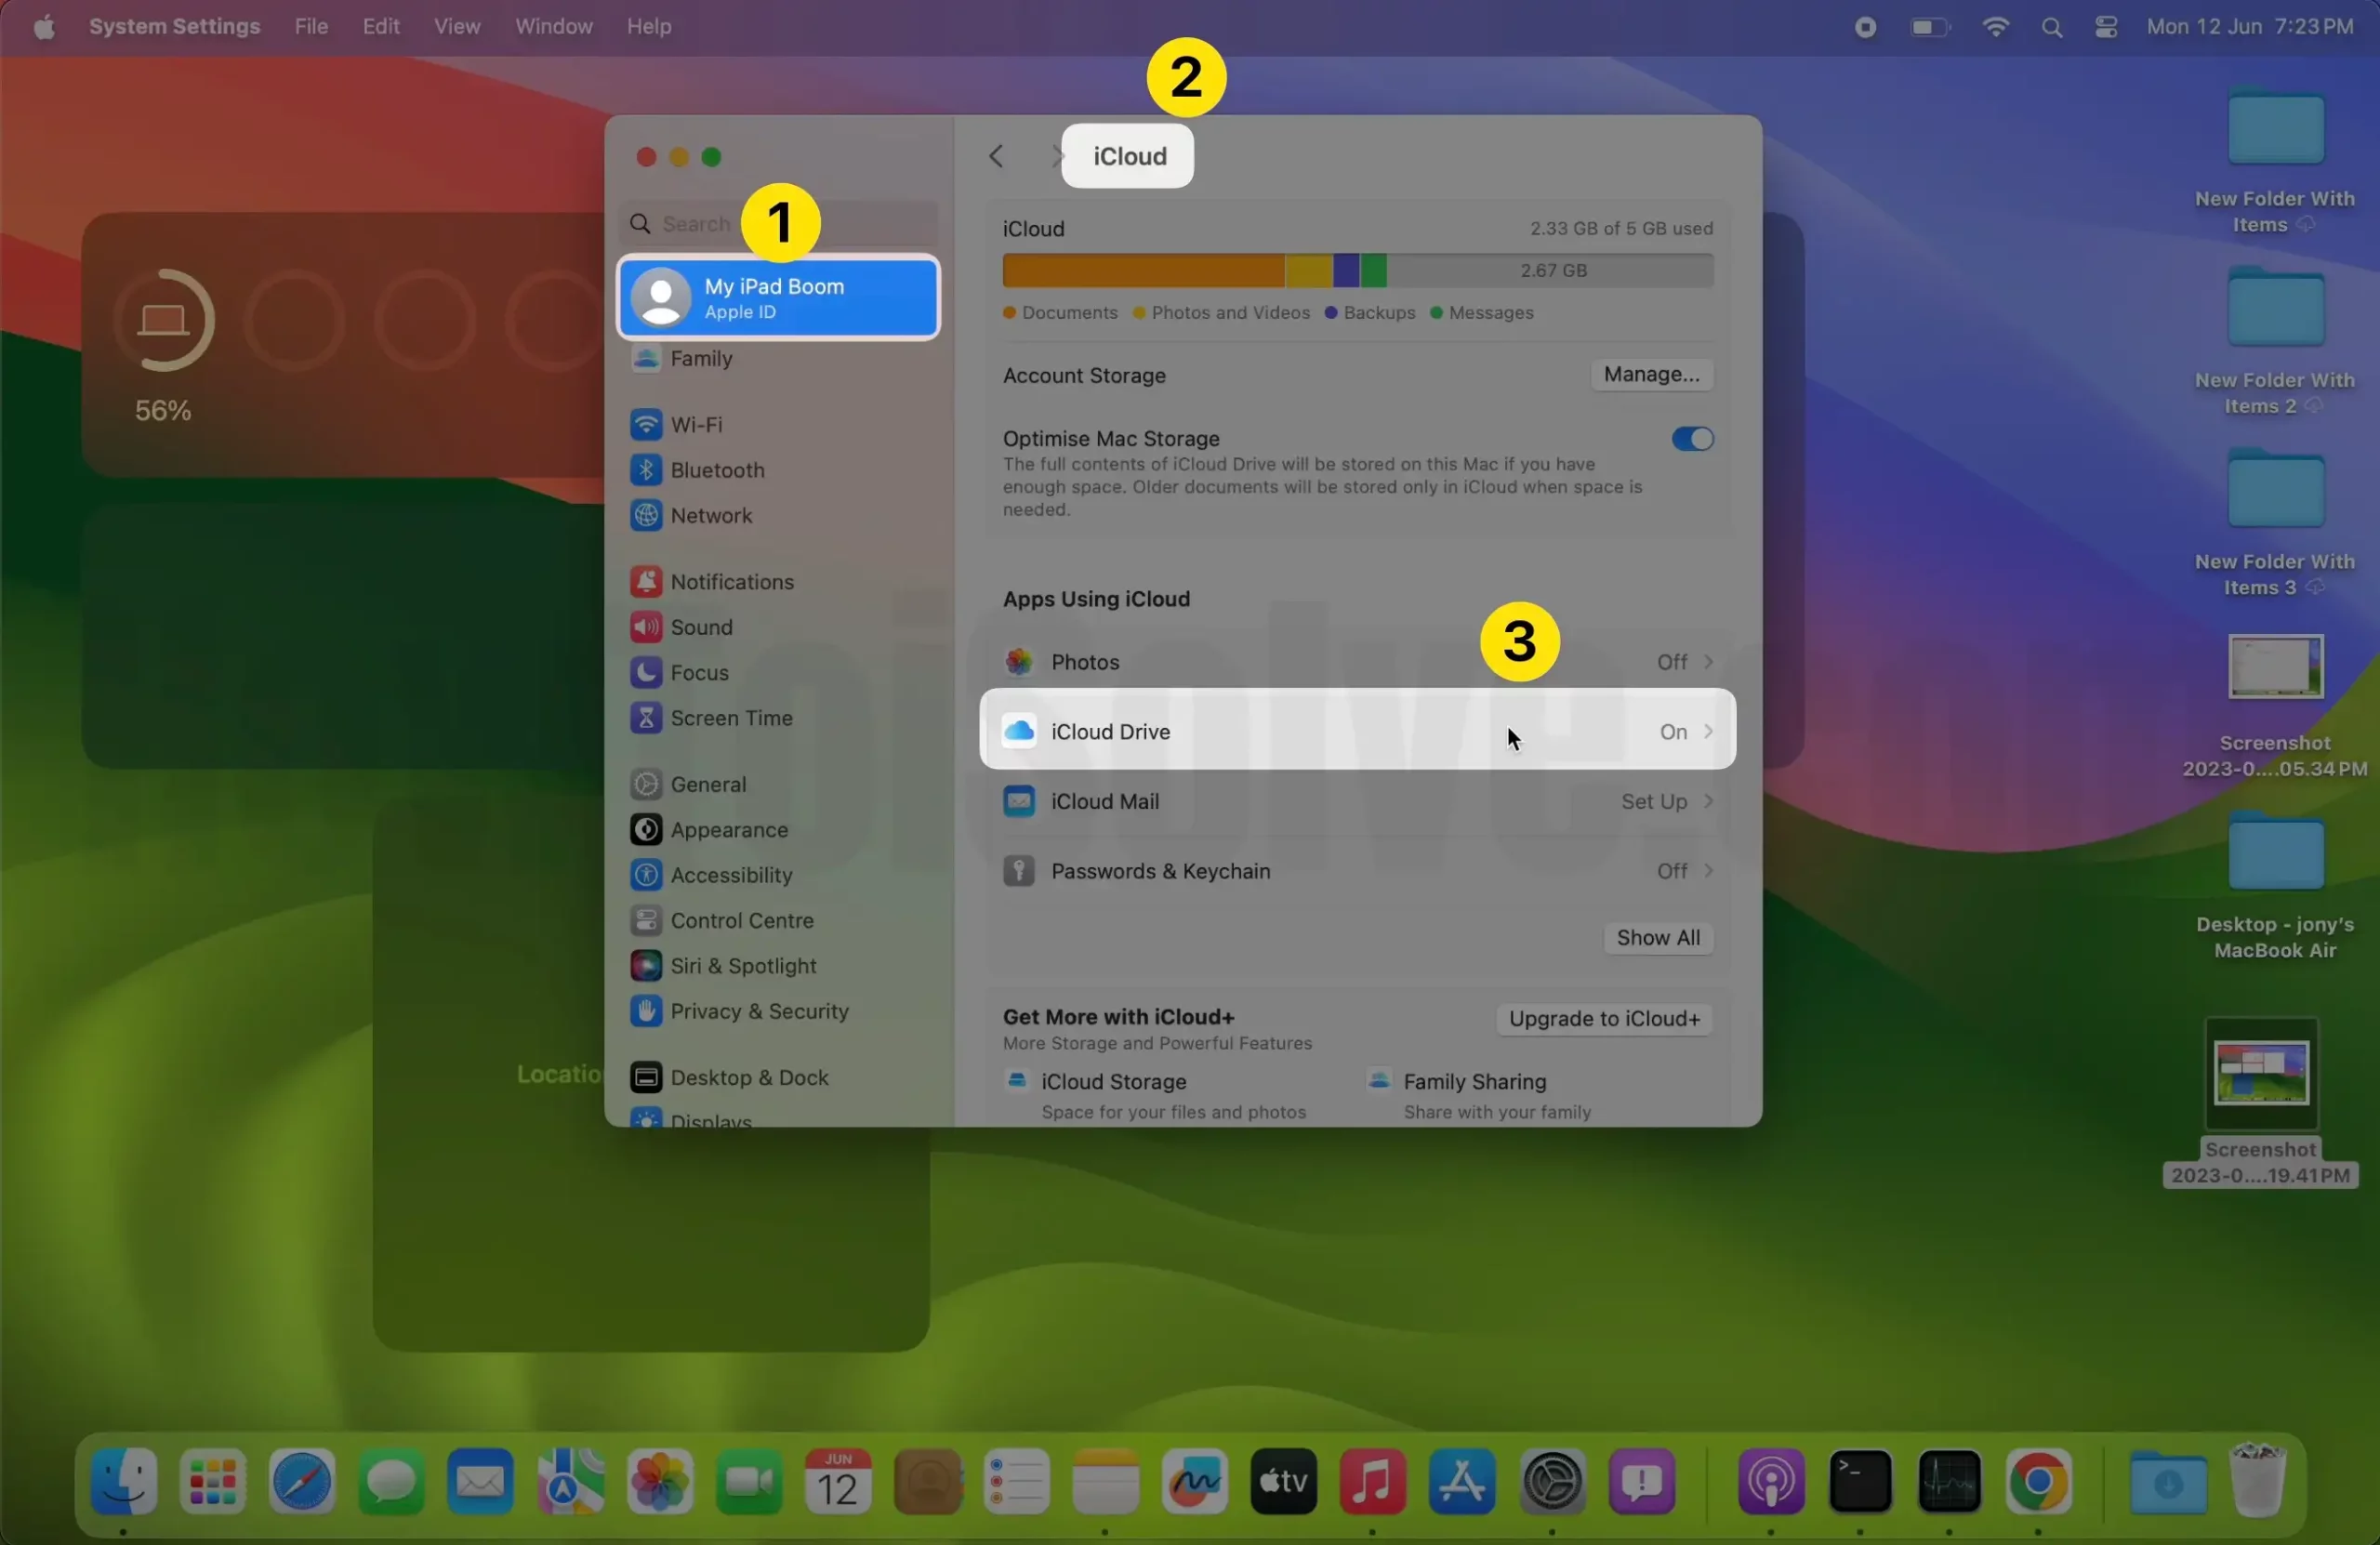 Turn off icloud for Desktop and Documents folder on Mac